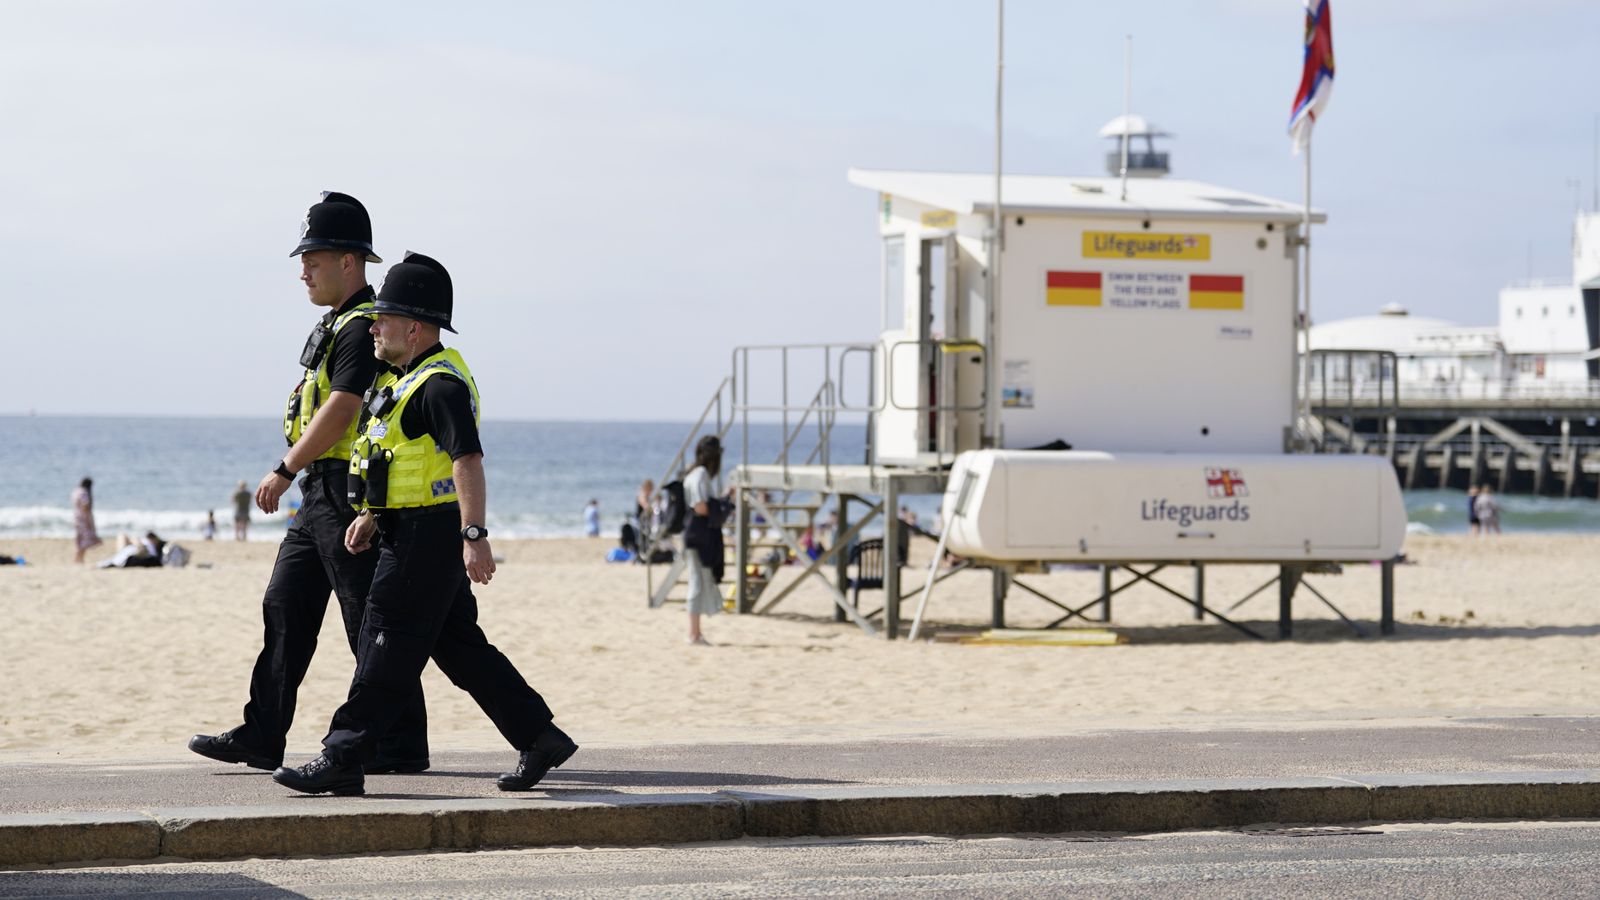 Bournemouth: Boy, 17, arrested on suspicion of murder after woman stabbed to death on beach